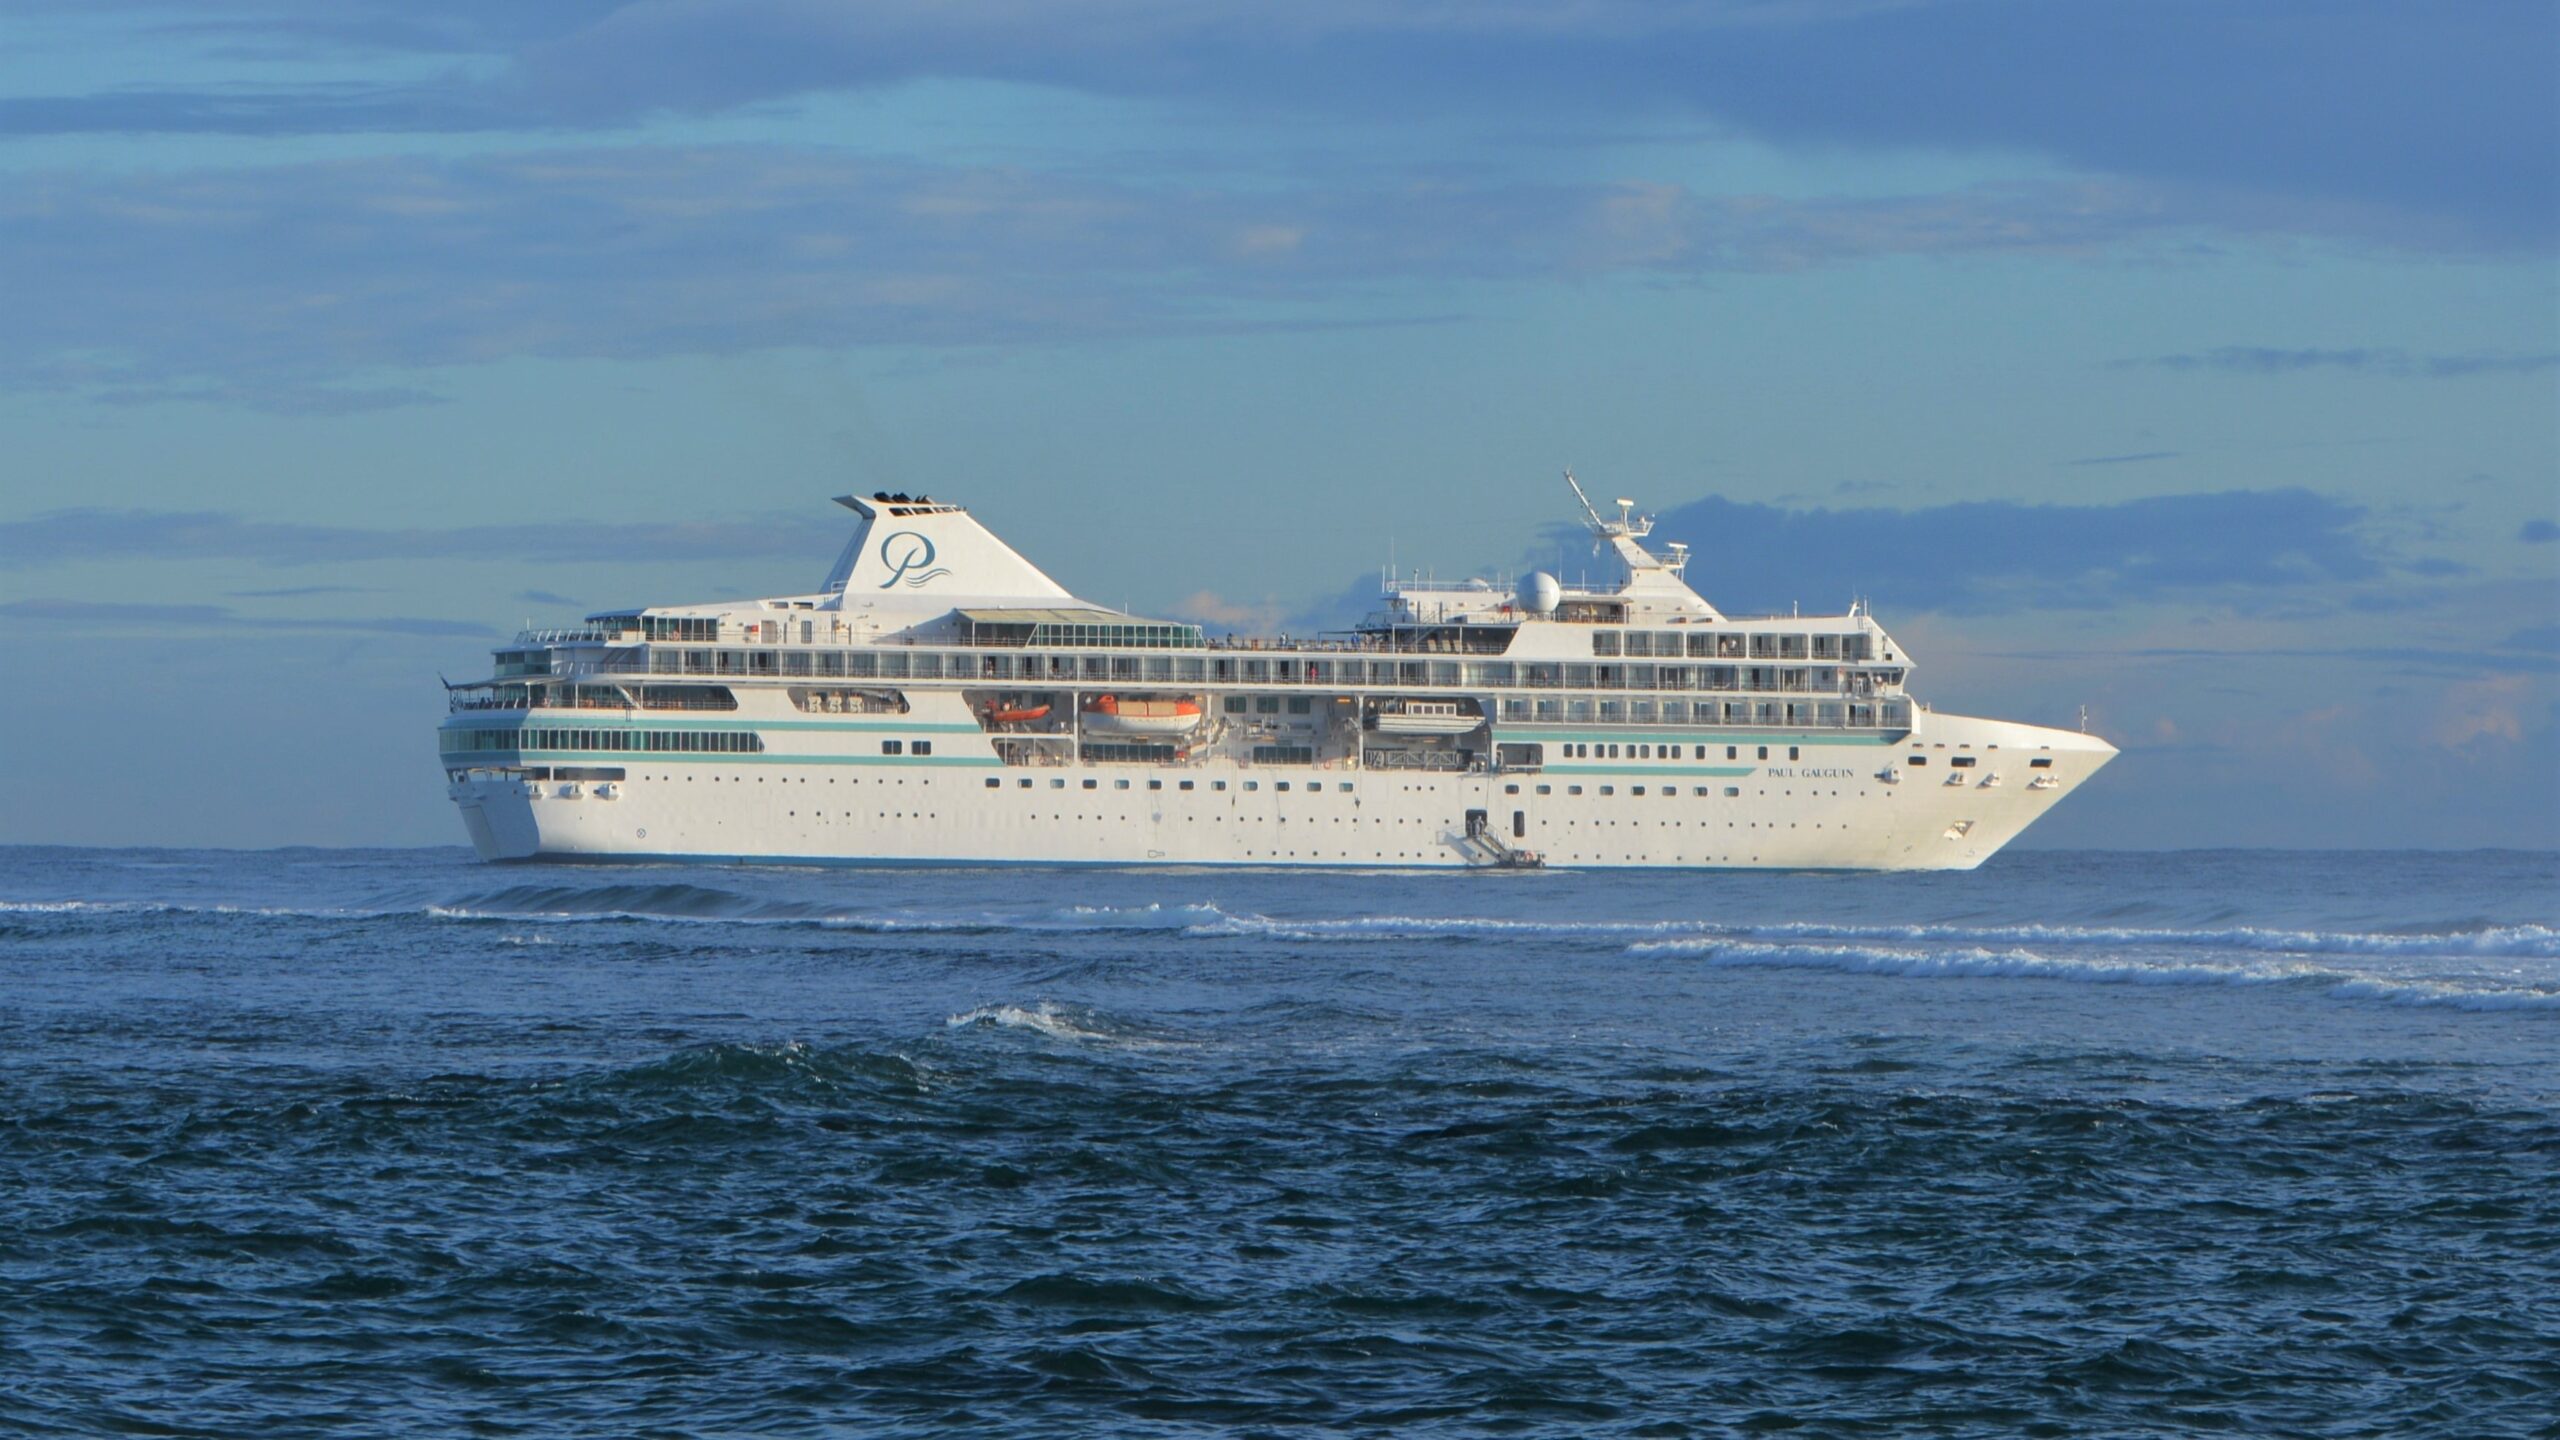 More cruise ships to visit the Cook Islands